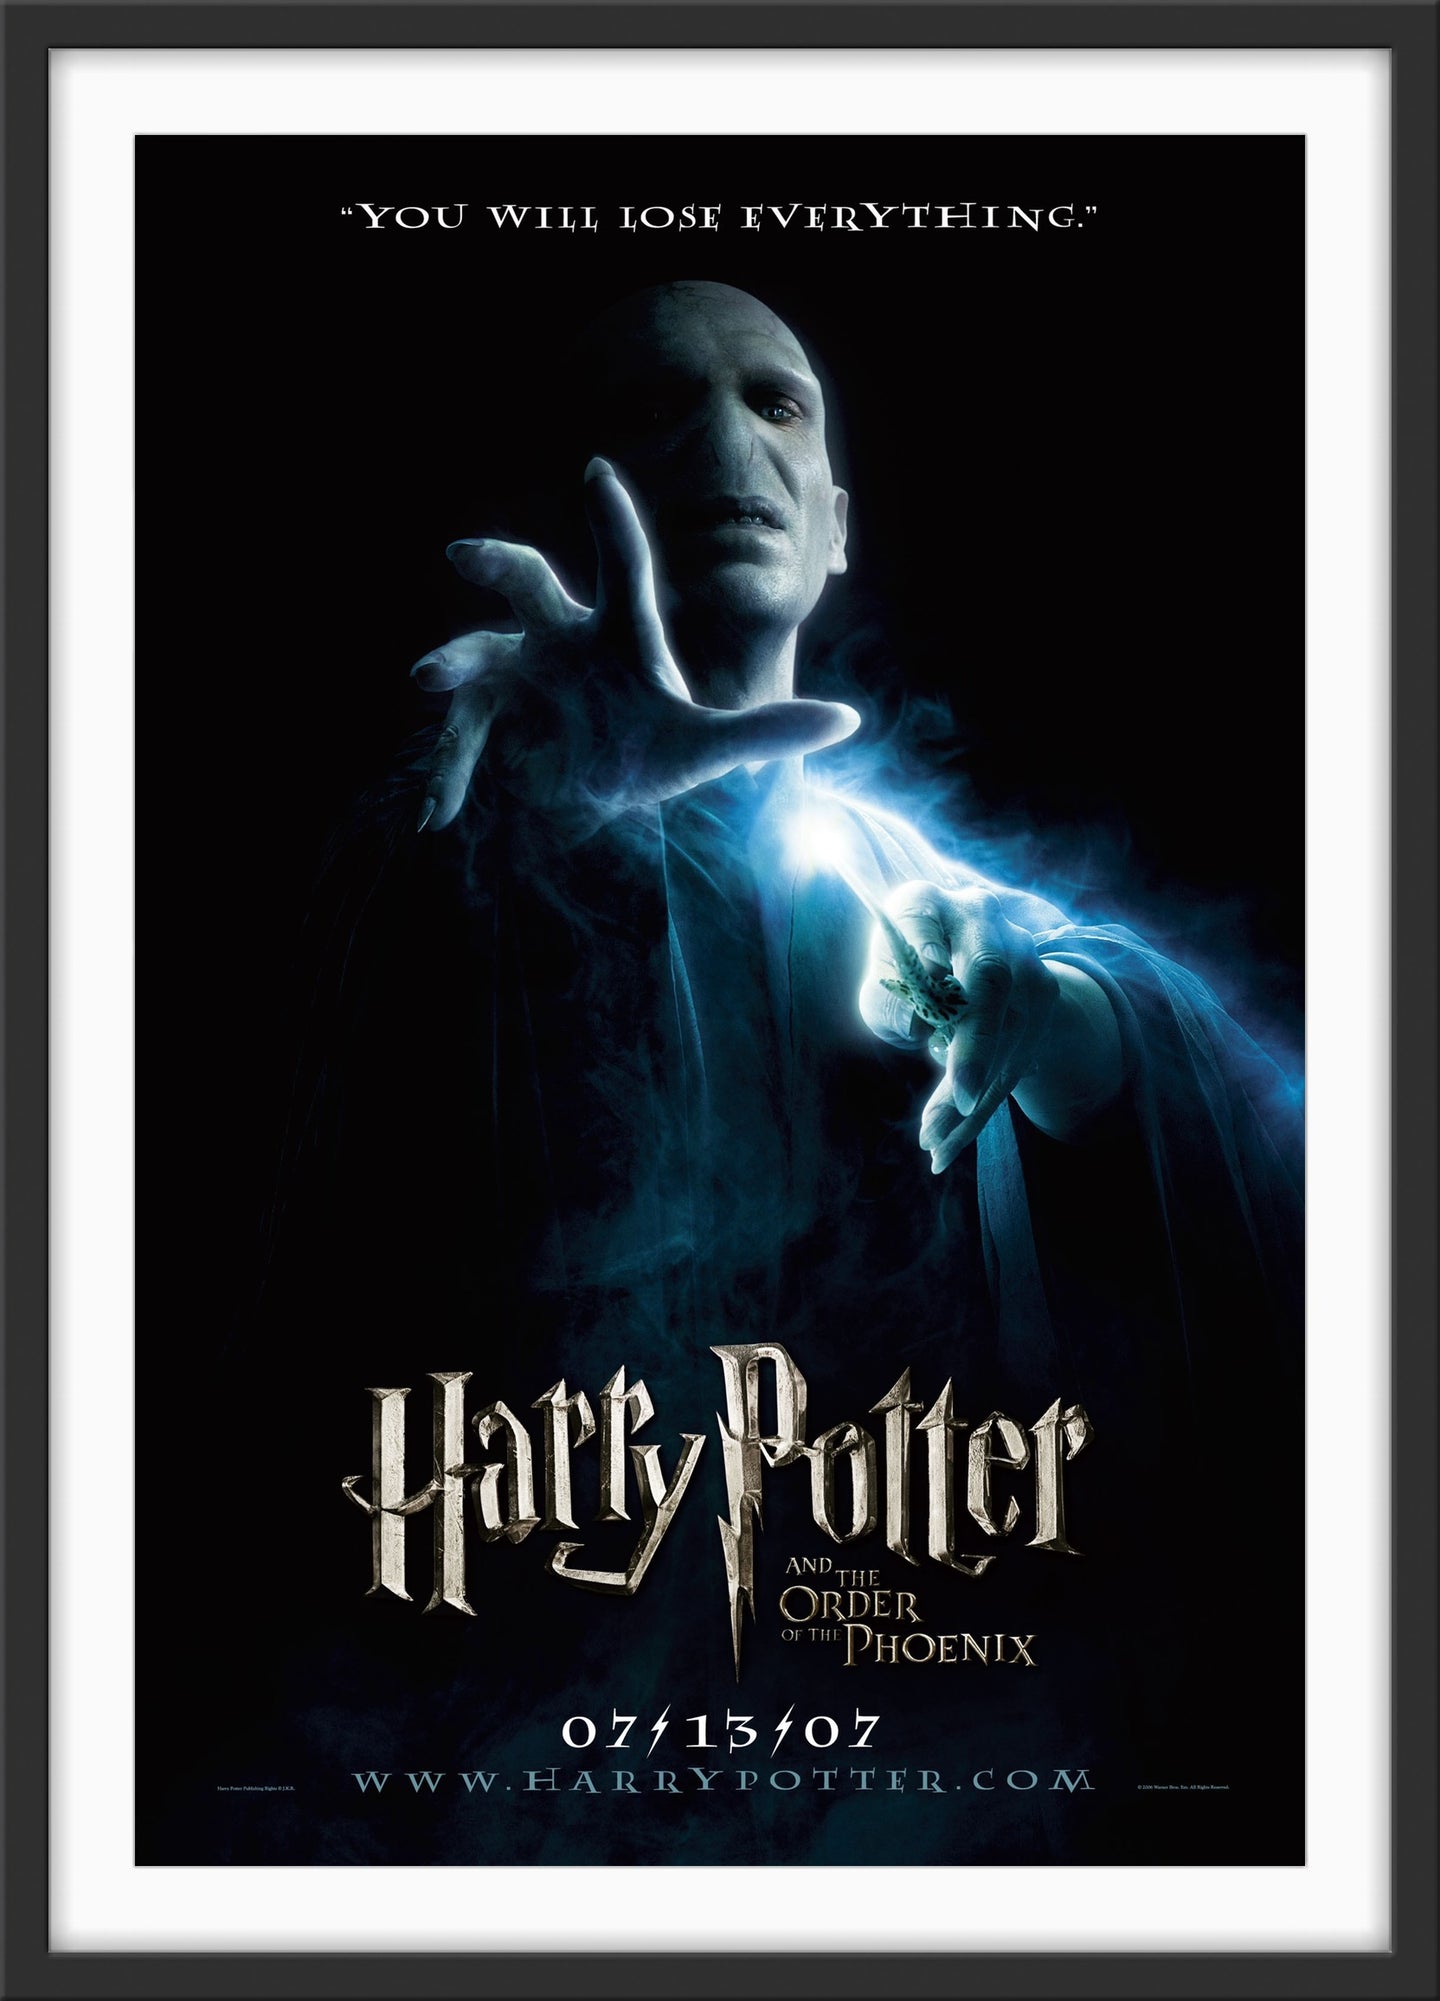 An original movie poster for the film Harry Potter and the Order of the Phoenix